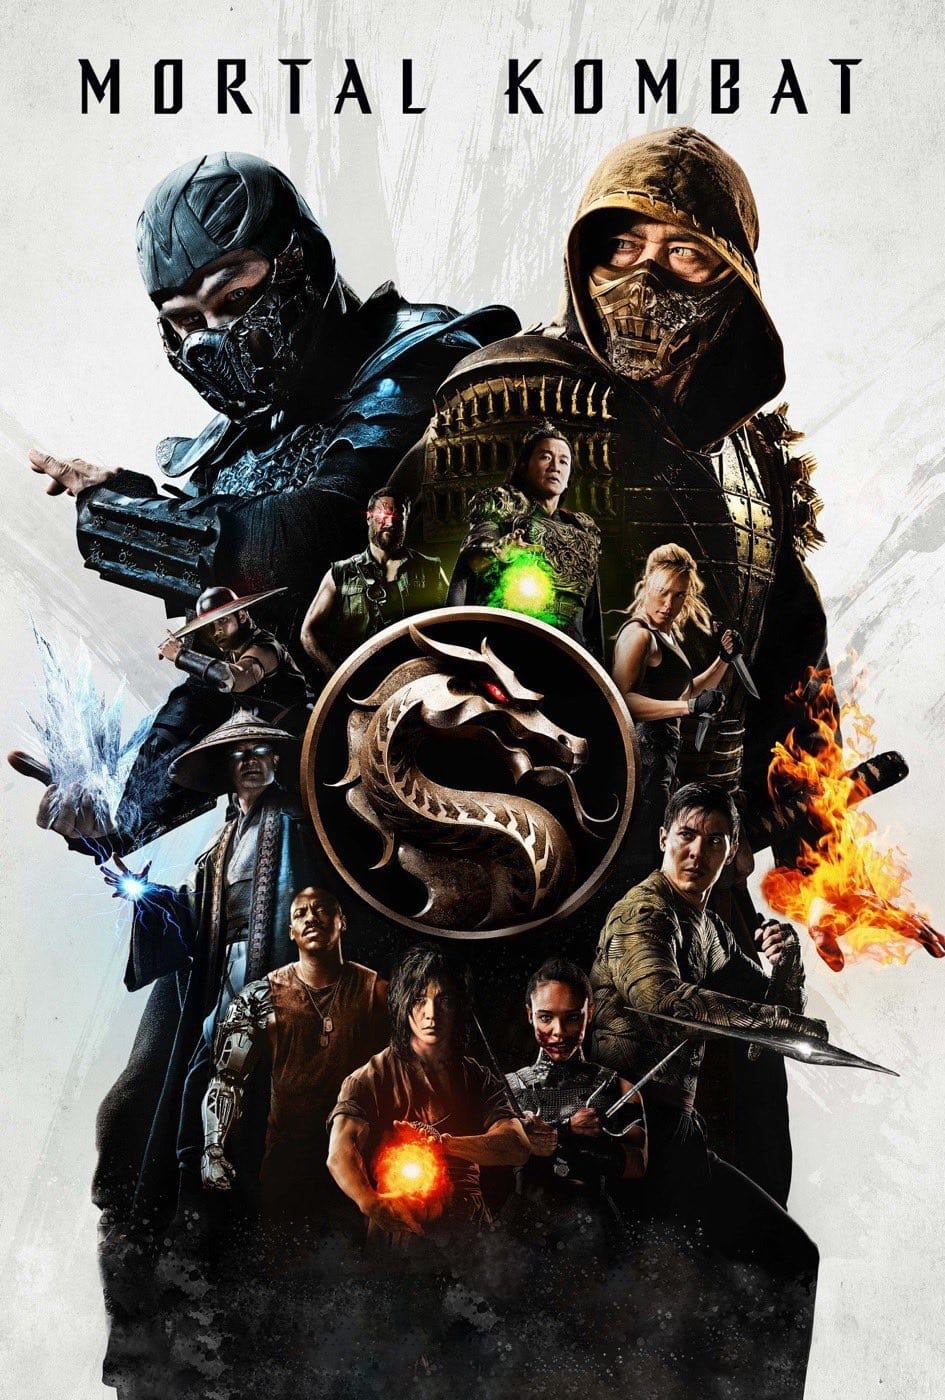 Review: It doesn't skimp on gore, but the new 'Mortal Kombat' movie is no flawless  victory